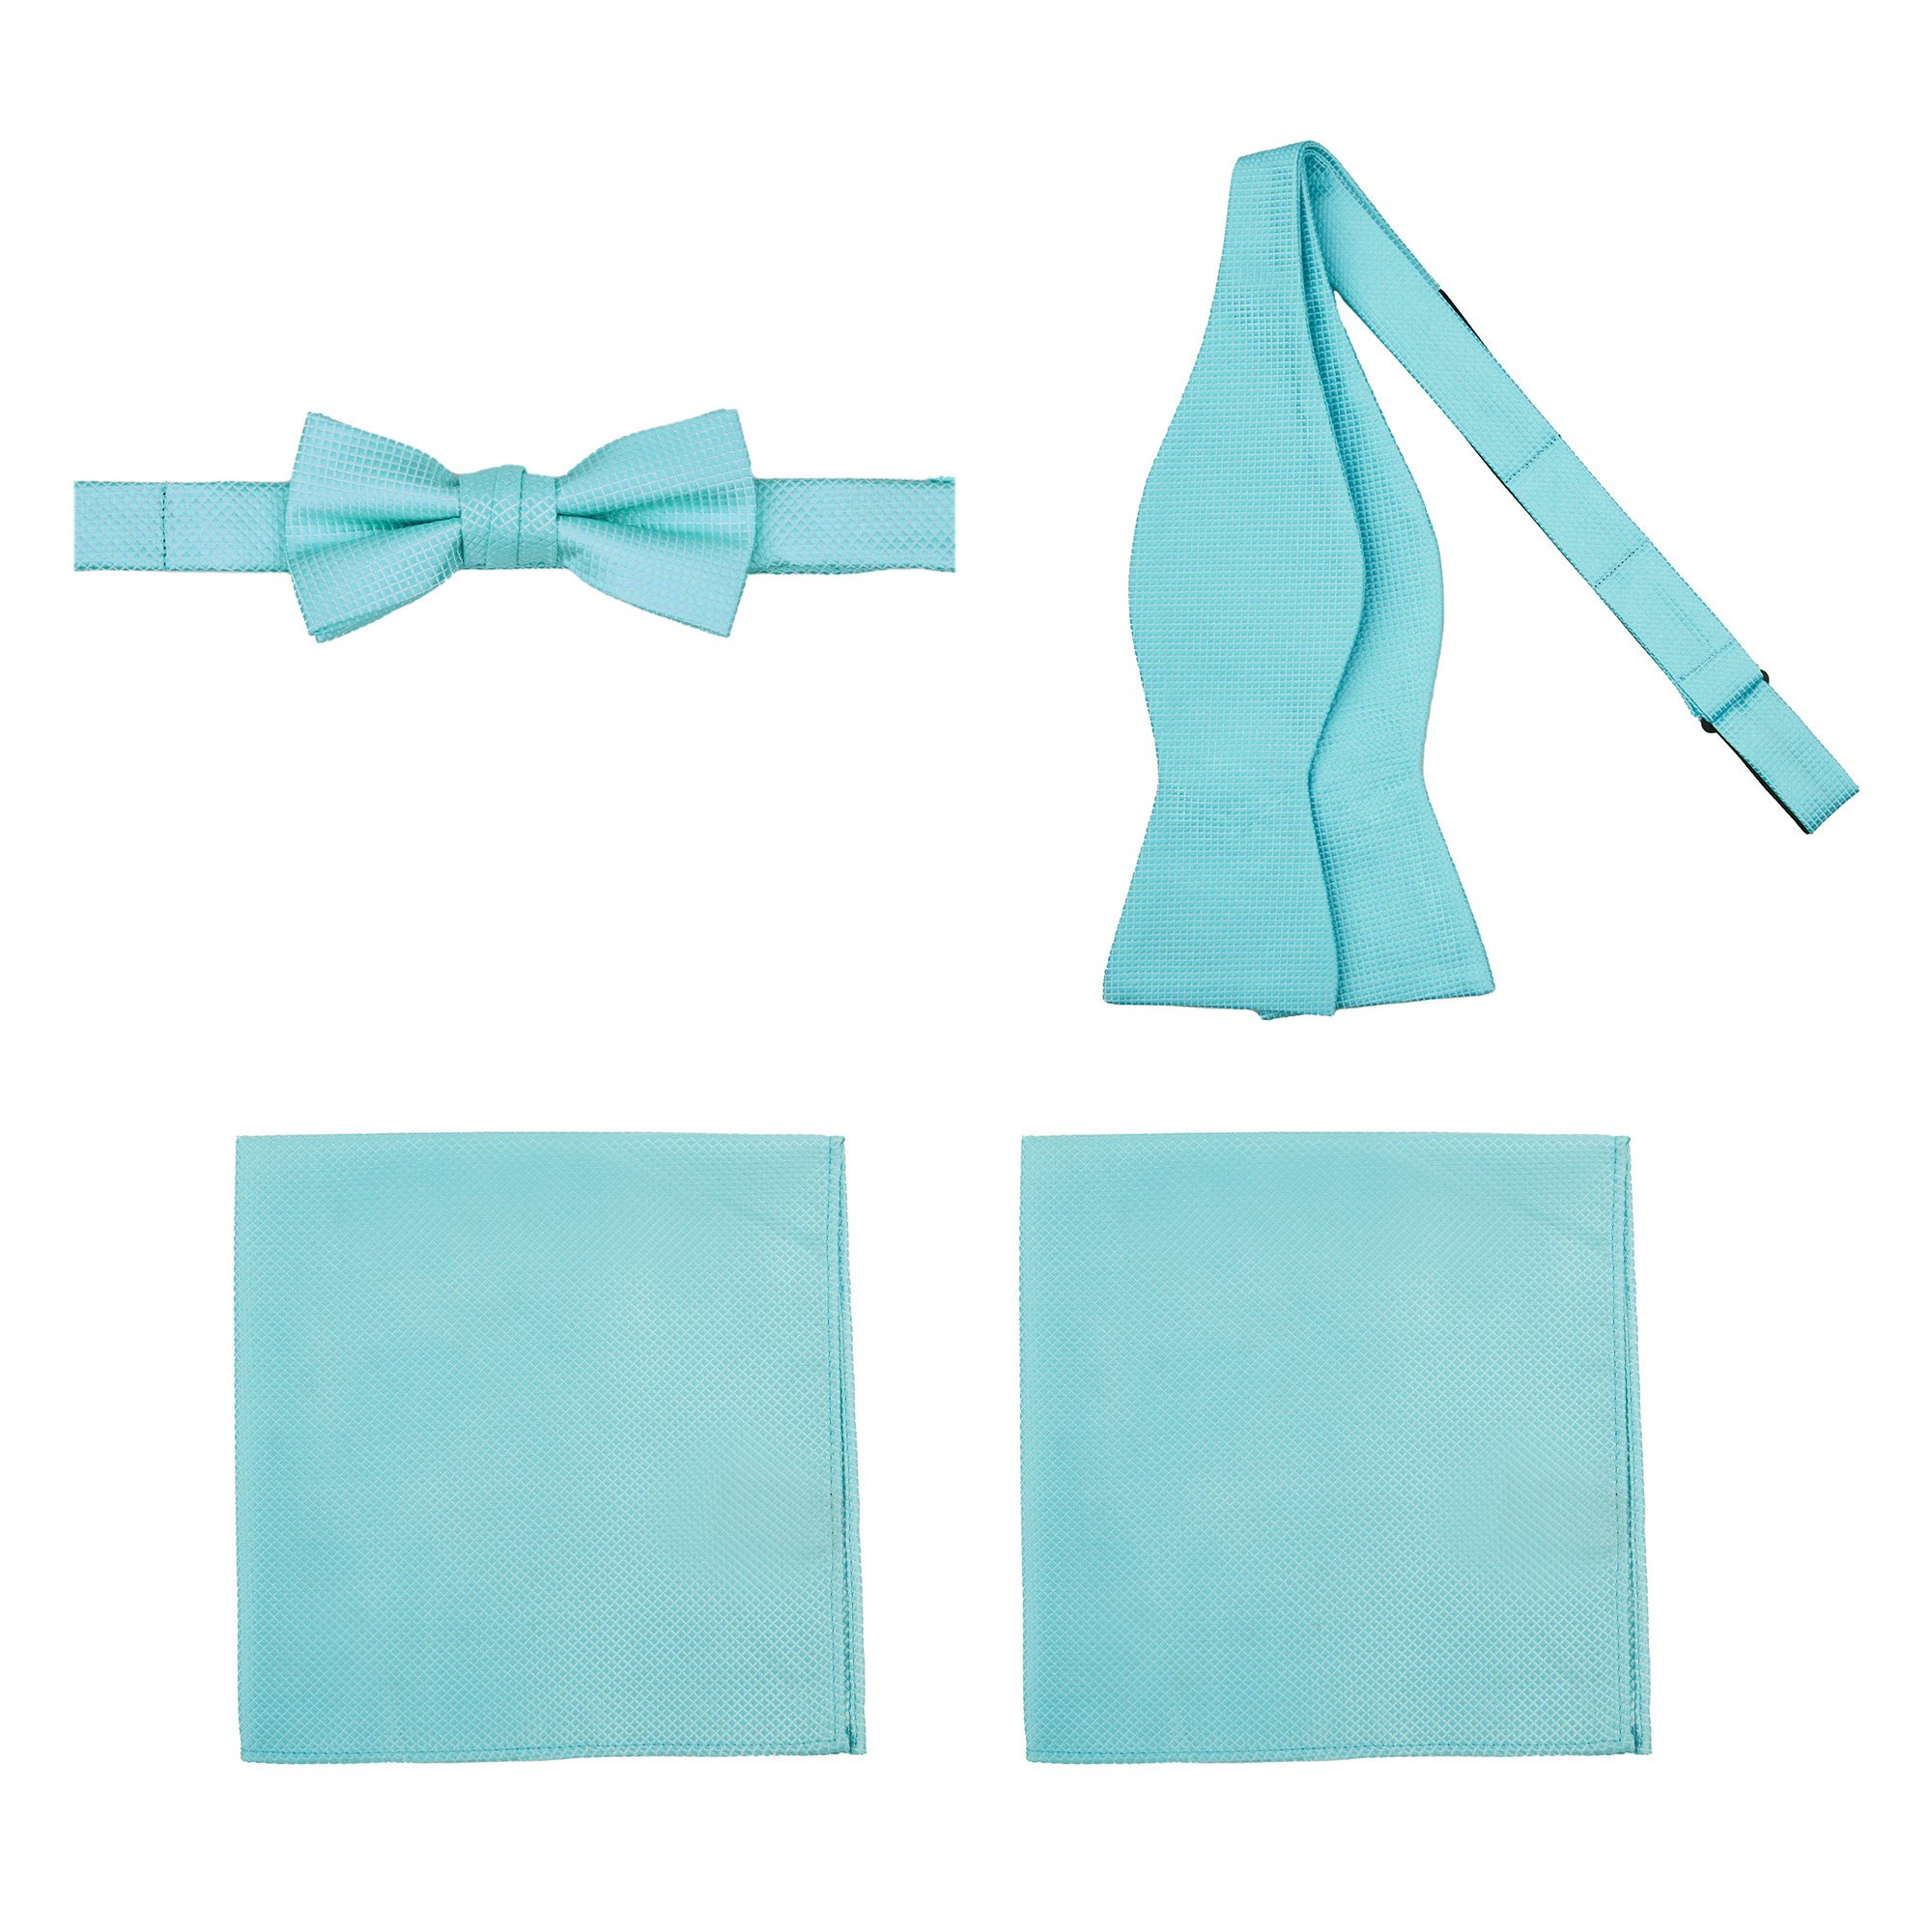 4 Piece Set: Jacob Alexander Men and Young Boys' Woven Subtle Mini Squares Self-Tie Bow Tie Adjustable Pre-Tied Banded Bow Tie and Pocket Squares - Light Turquoise - image 1 of 7